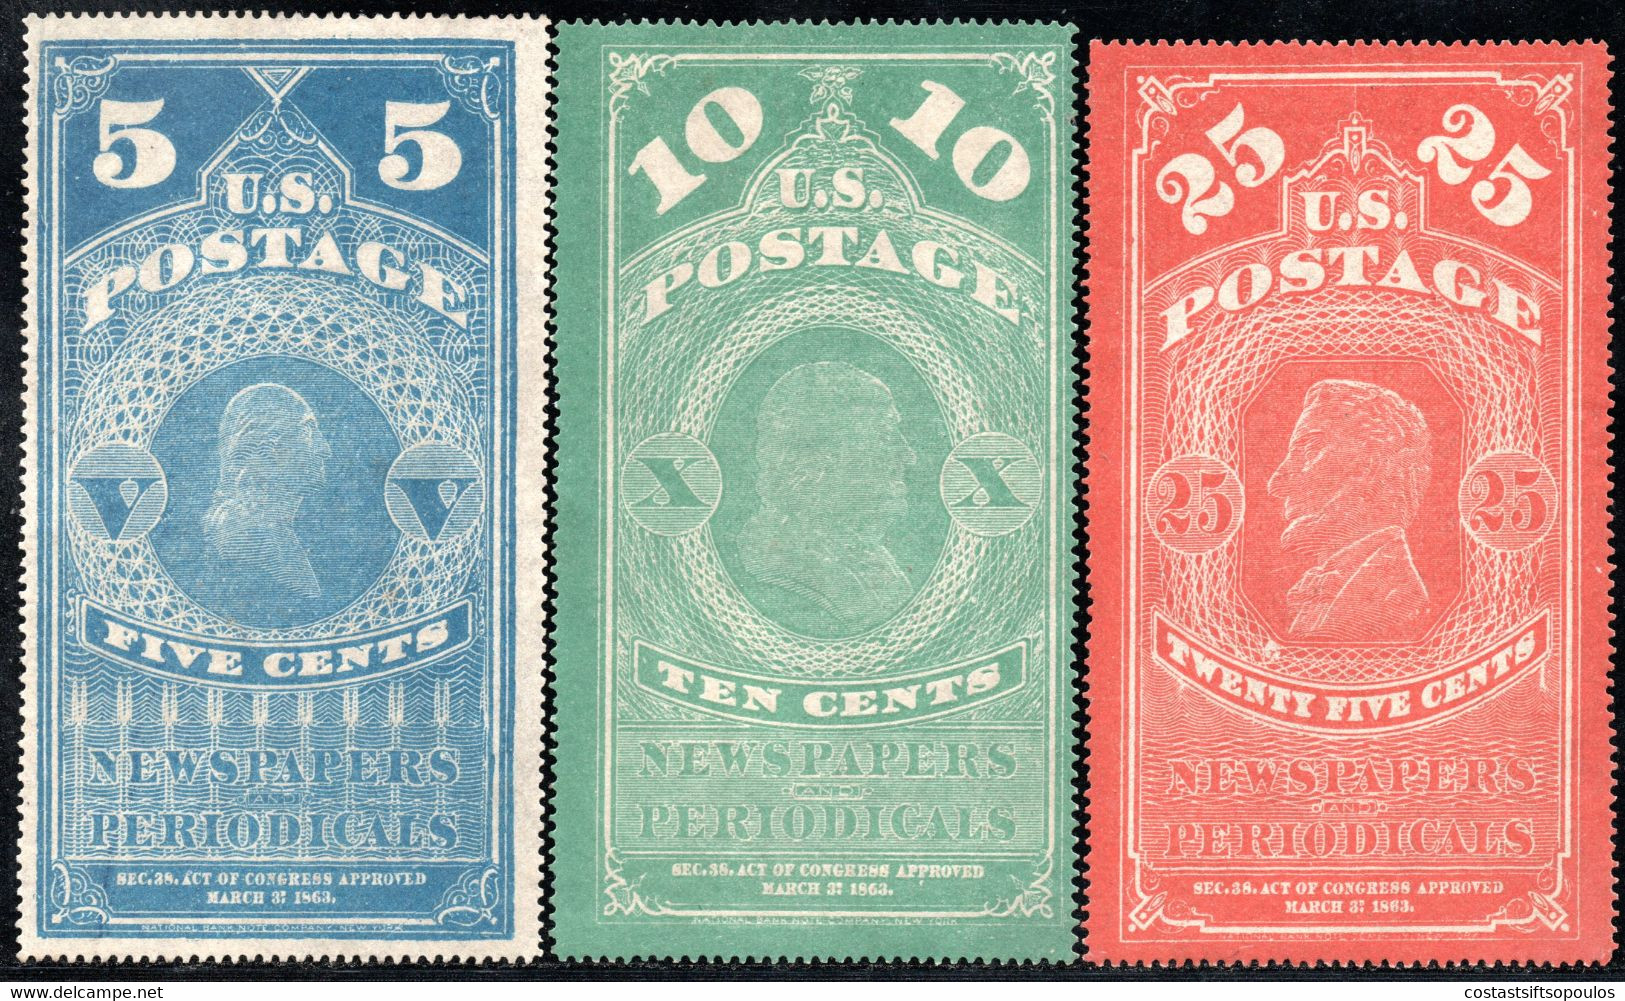 234.UNITED STATES.1865-1875 NEWSPAPER.5,10,25 C.(*)POSSIBLY PRIVATE REPRINTS,FAKES,SOLD AS IS. - Periódicos & Gacetas